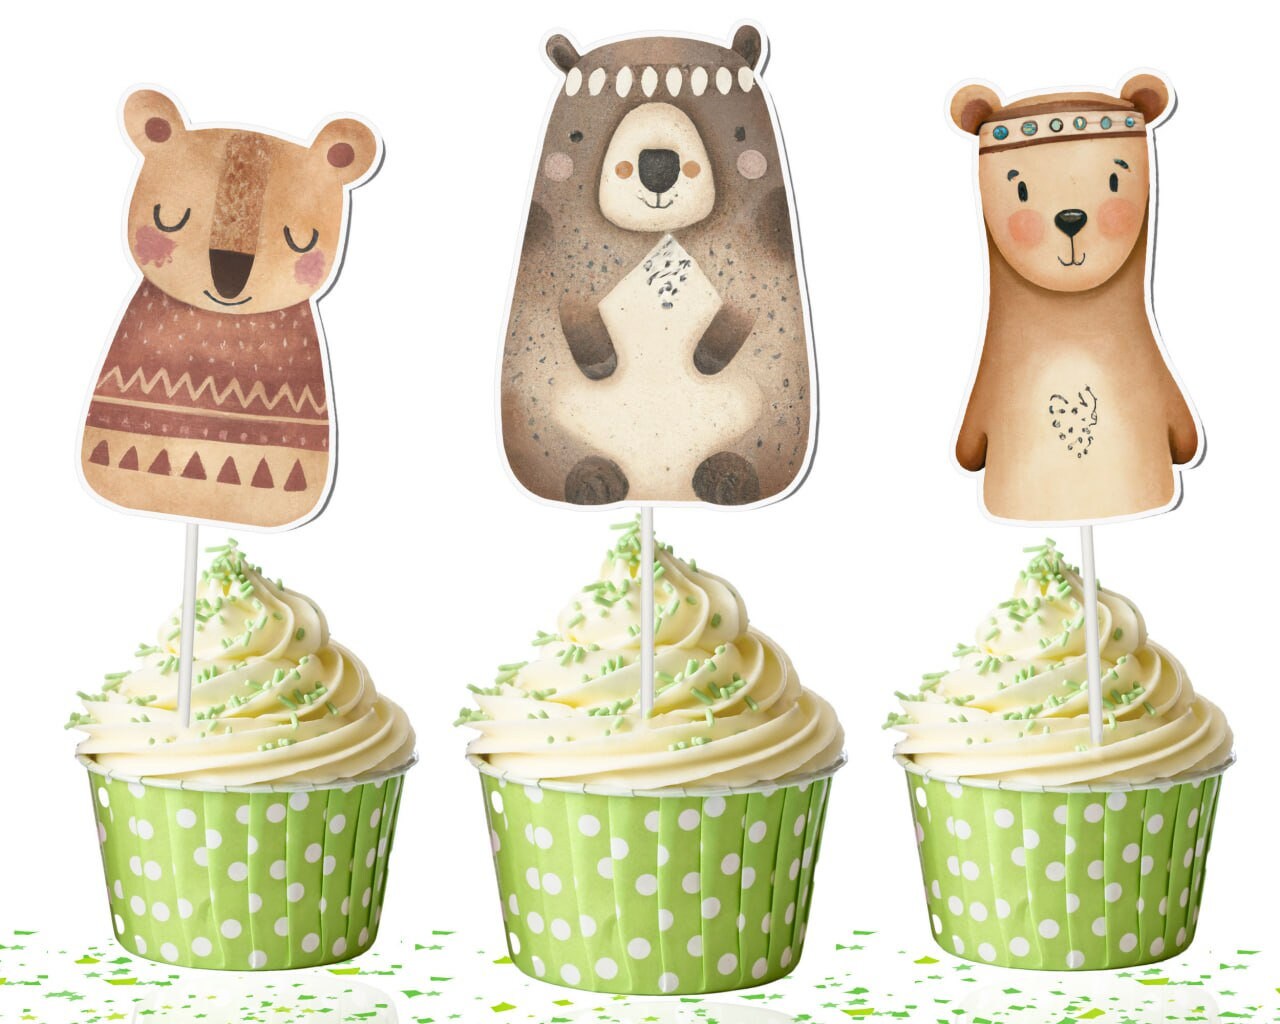 Adorable Bear Cartoon Cupcake Toppers for Woodland Themed Parties and Sweet Celebrations